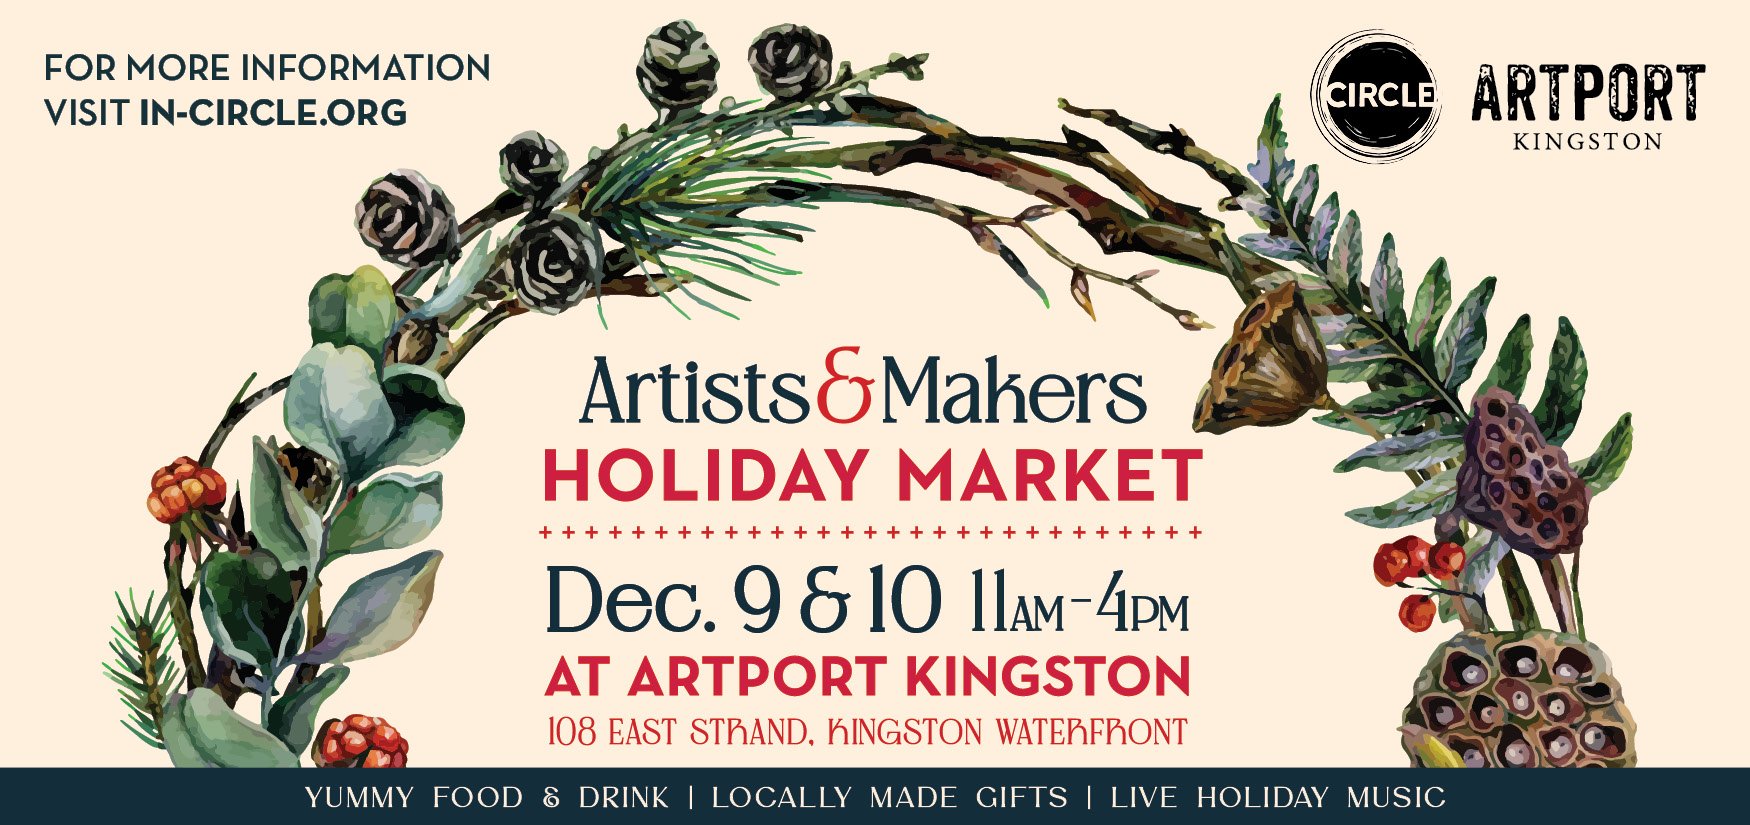 holiday market events flyer